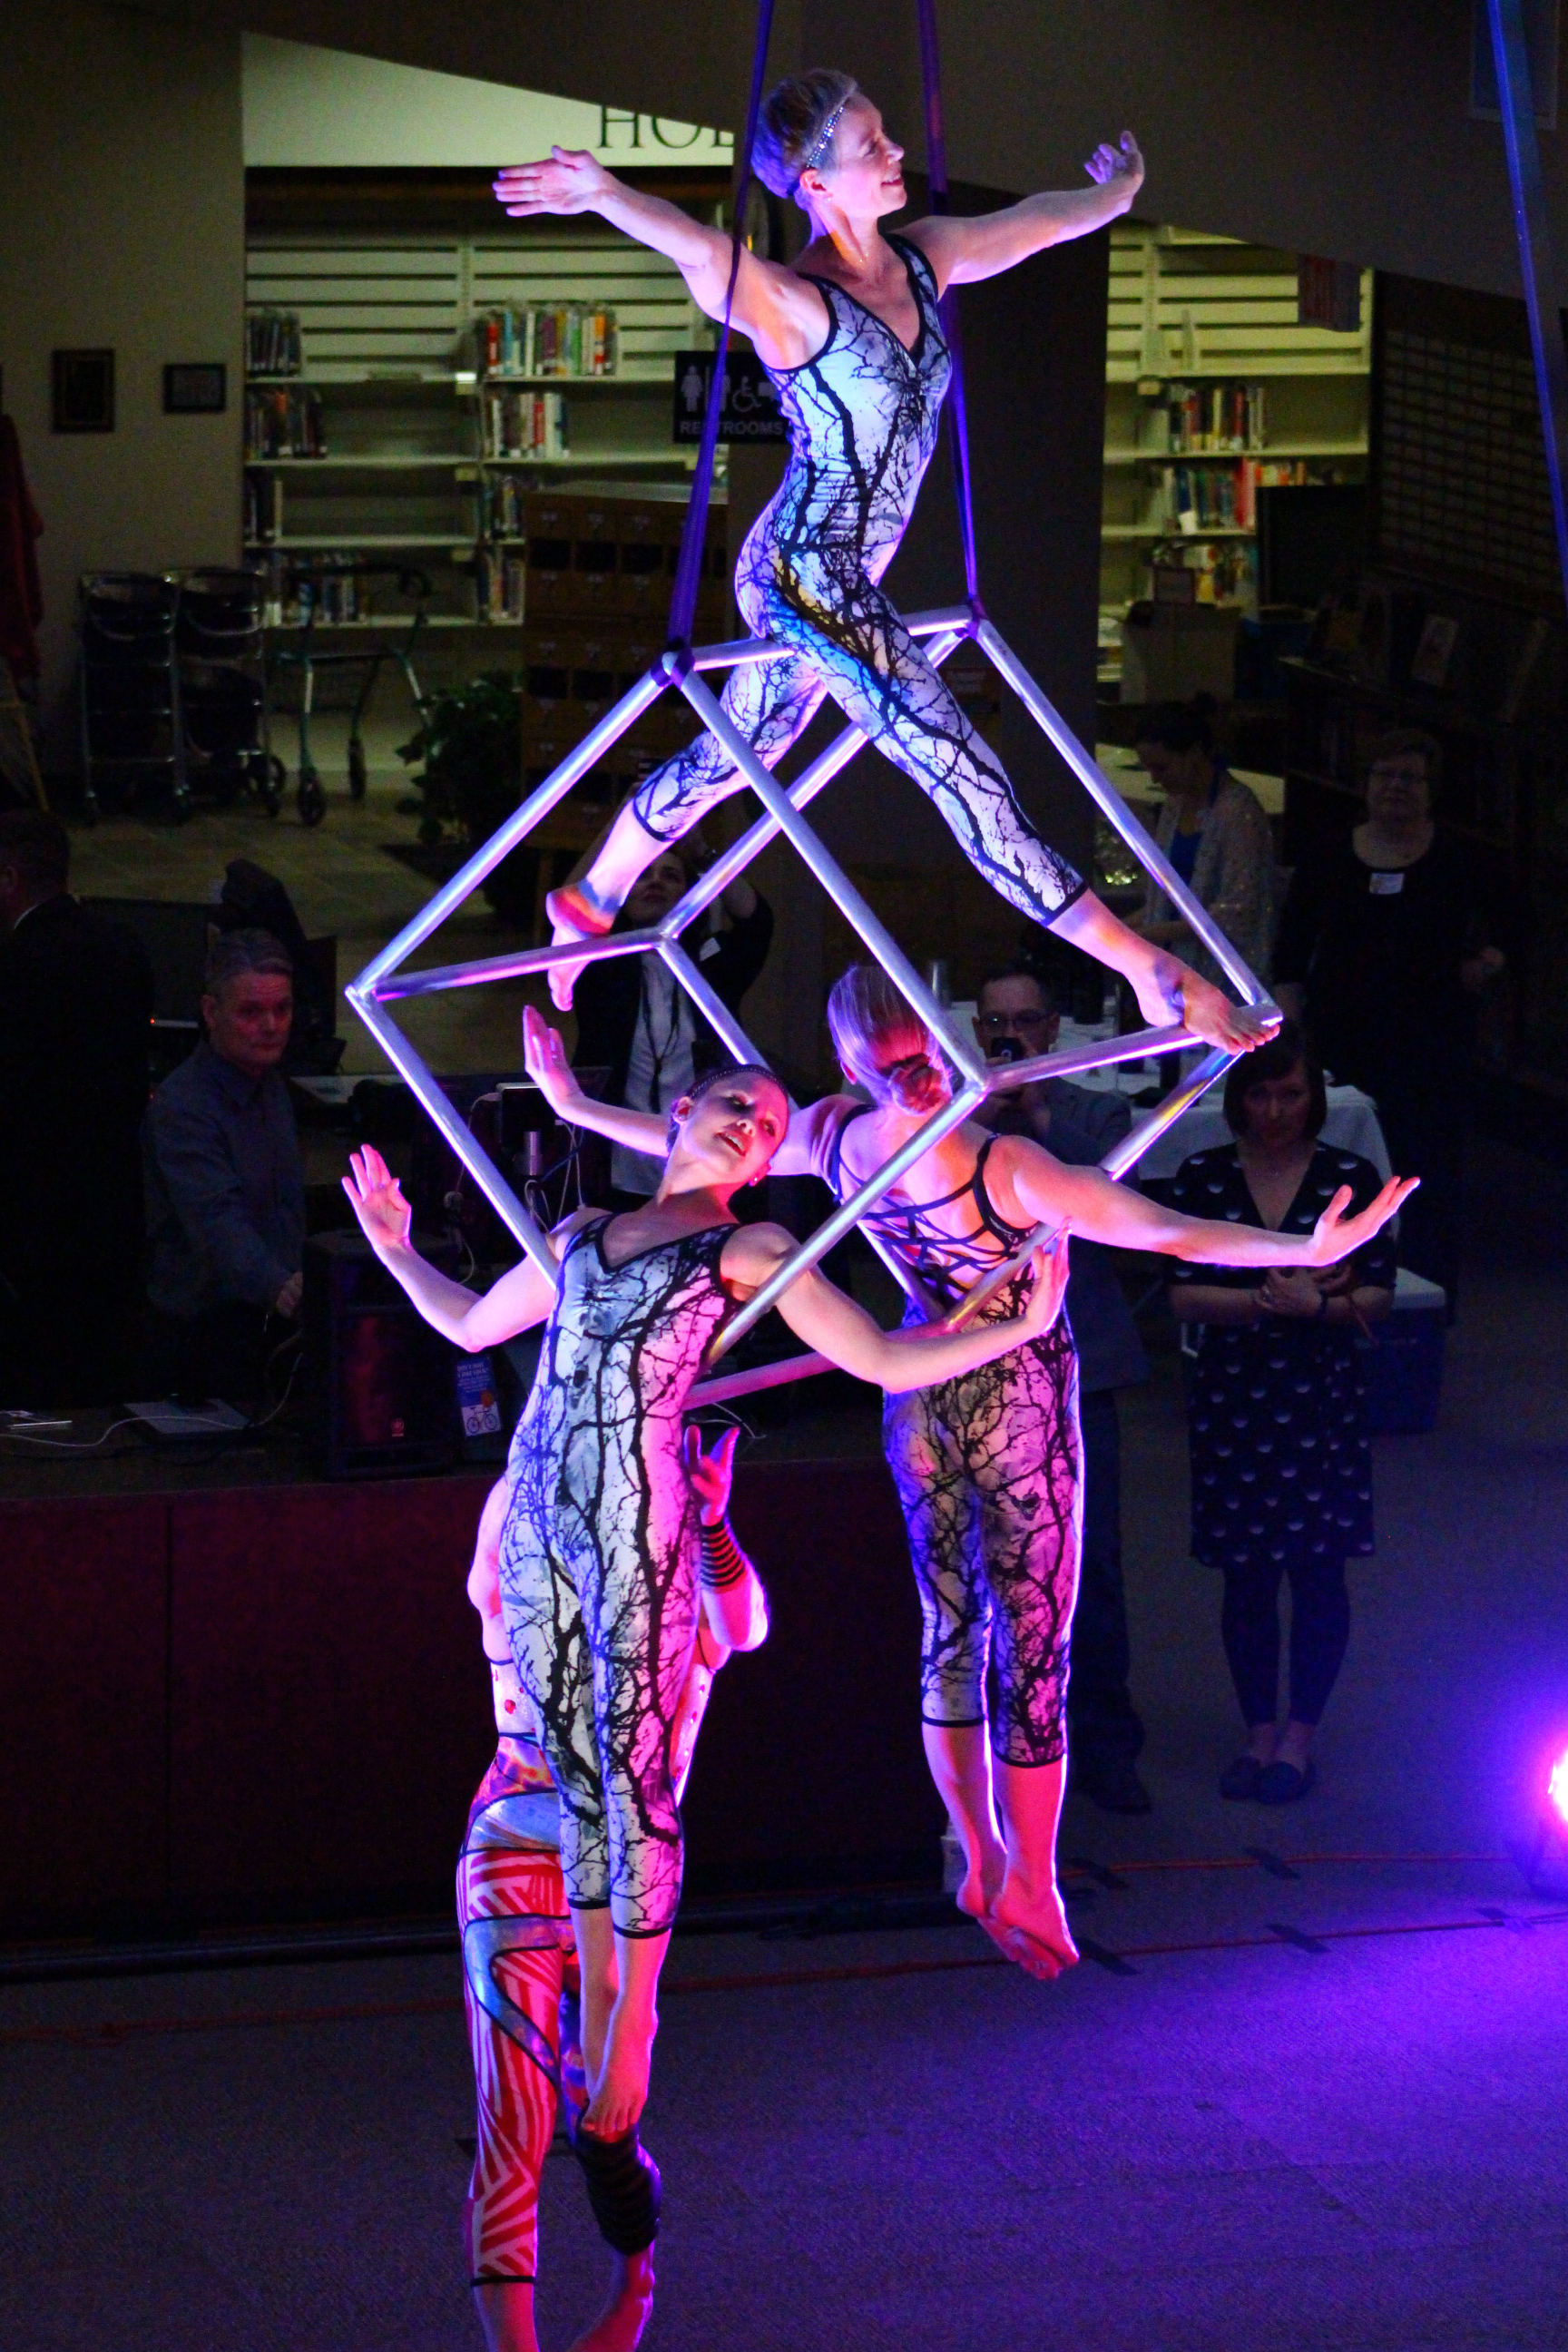 Aerial performers balancing on suspended cube framework